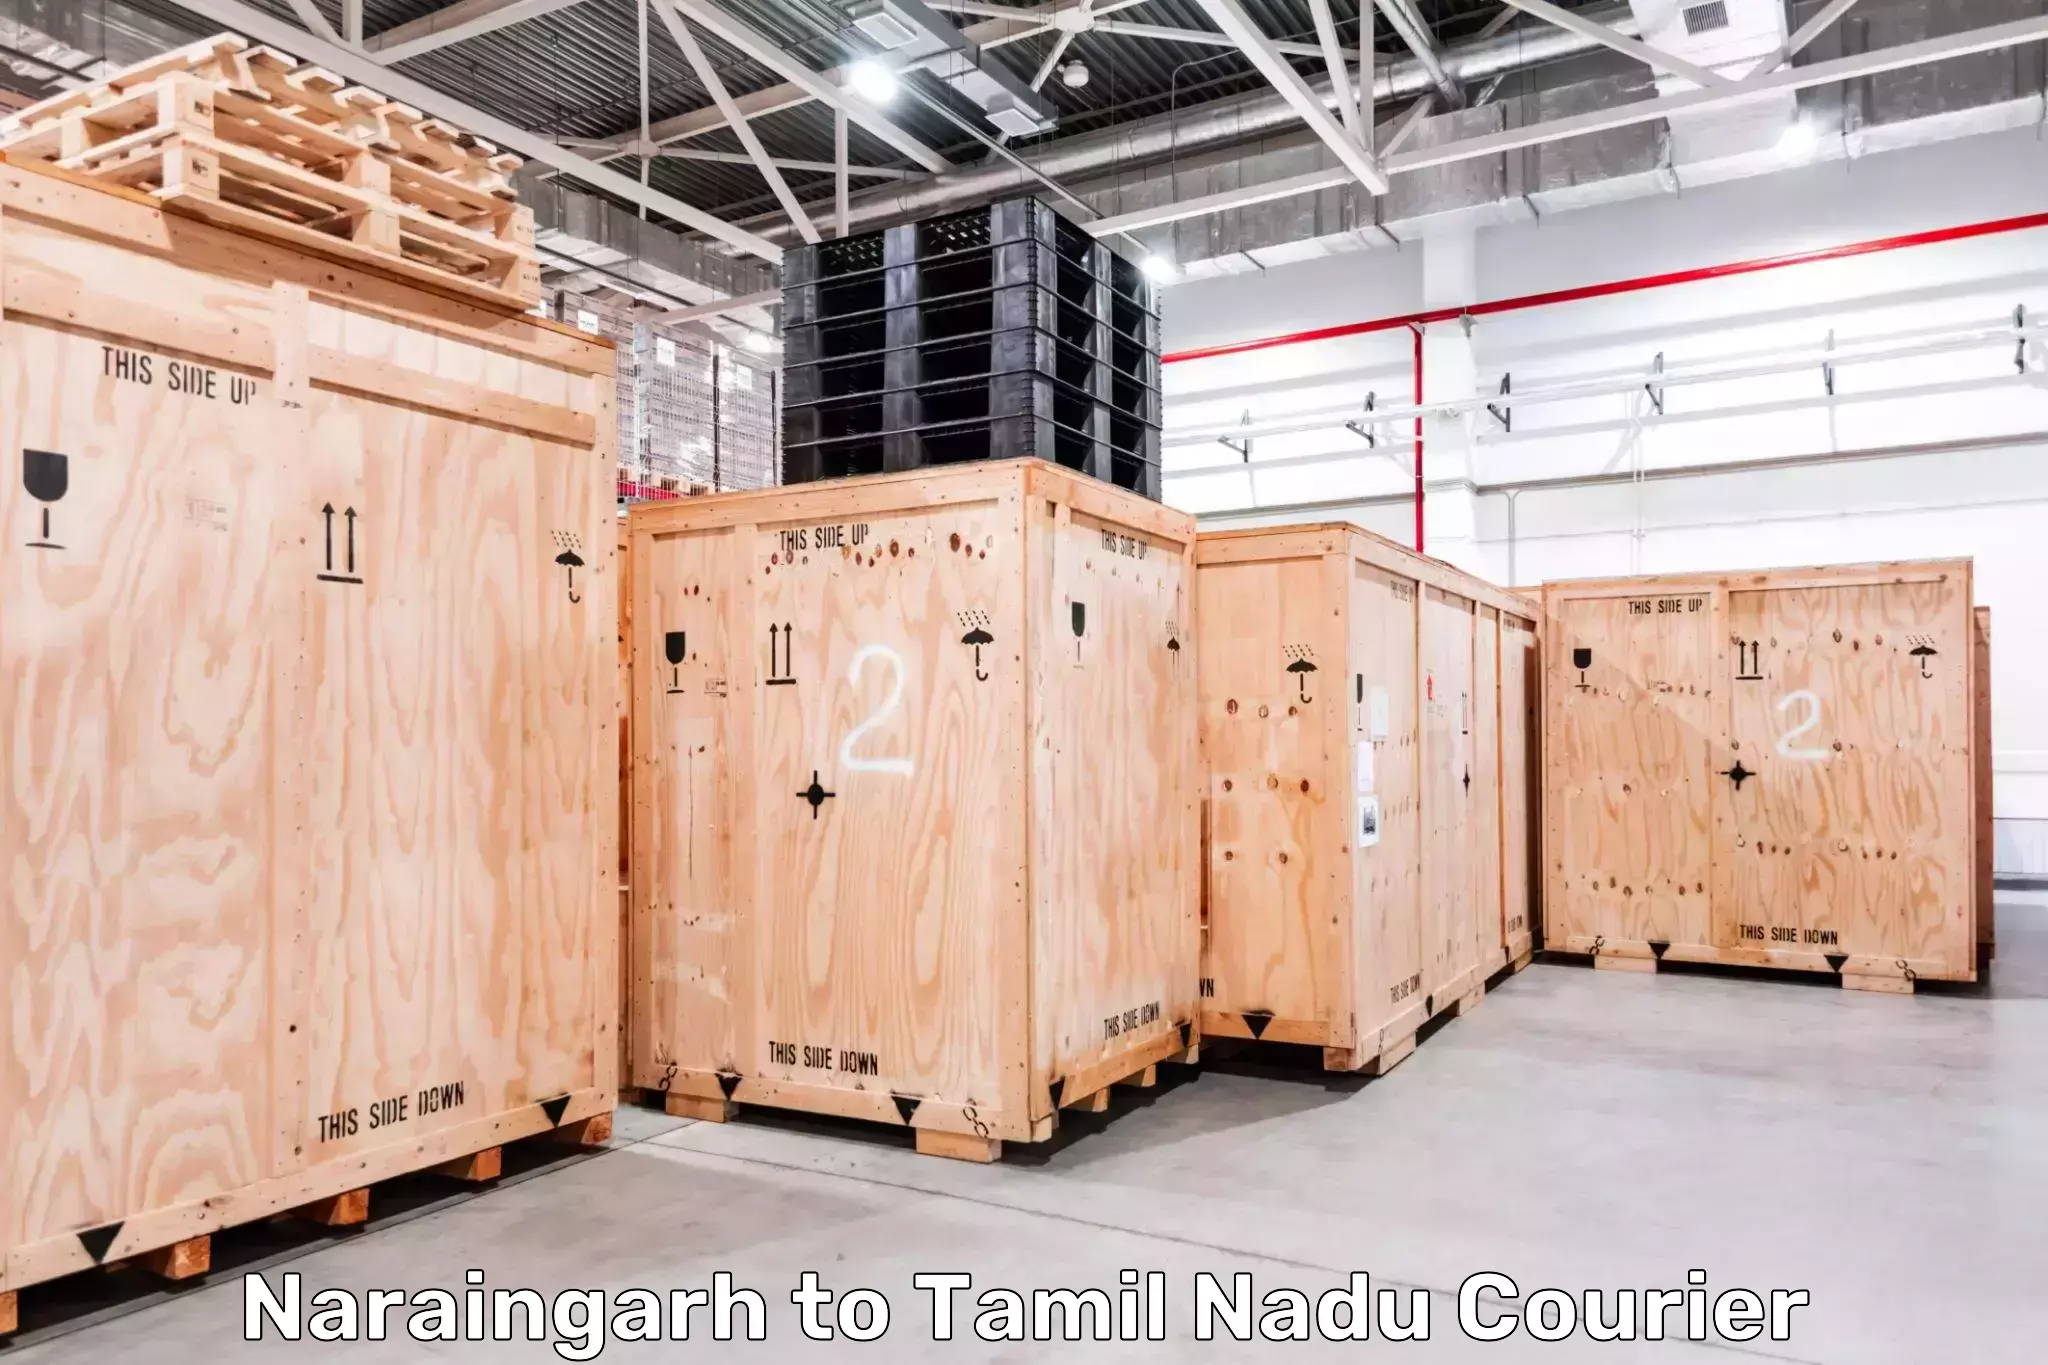 Package delivery network Naraingarh to Manapparai